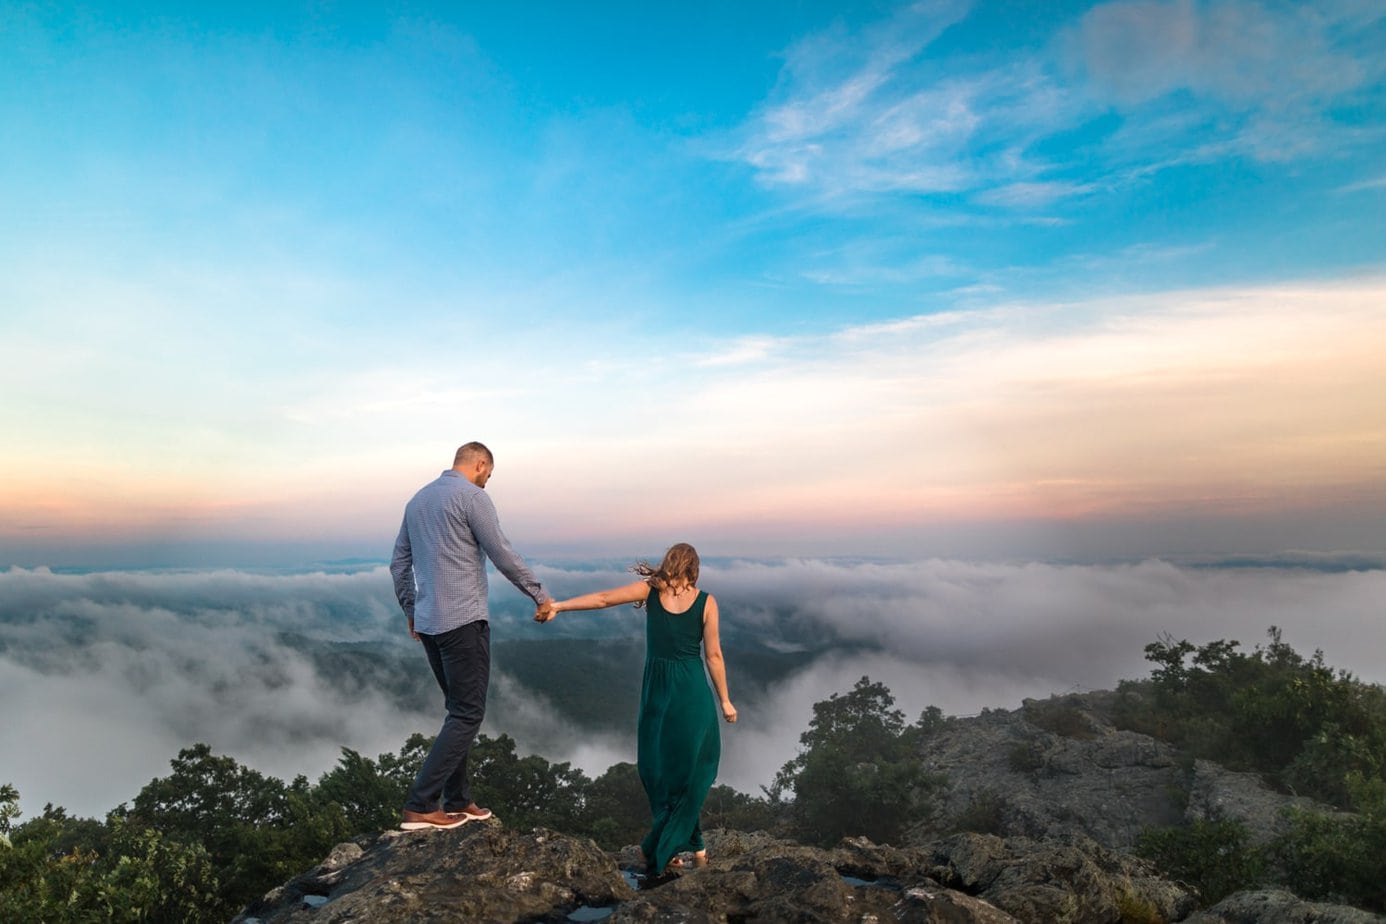 A man wearing a blue shirt and a woman wearing a green maxi dress walk away from the camera toward a mountain view. The sky is blue and fog is hanging in the mountains